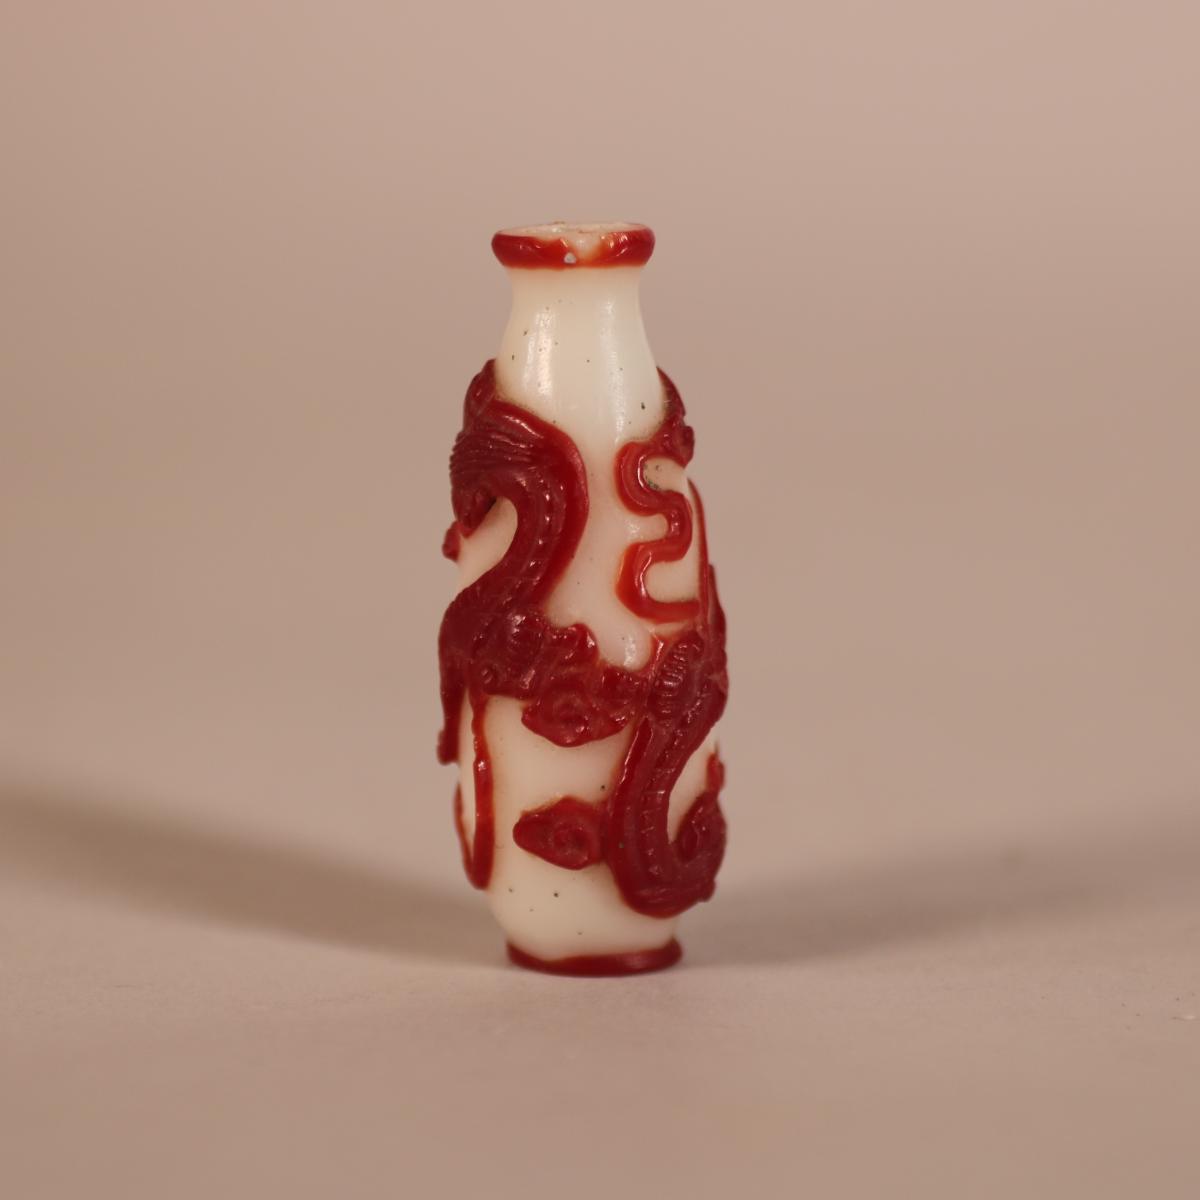 Other side of qing glass snuff bottle with red overlay